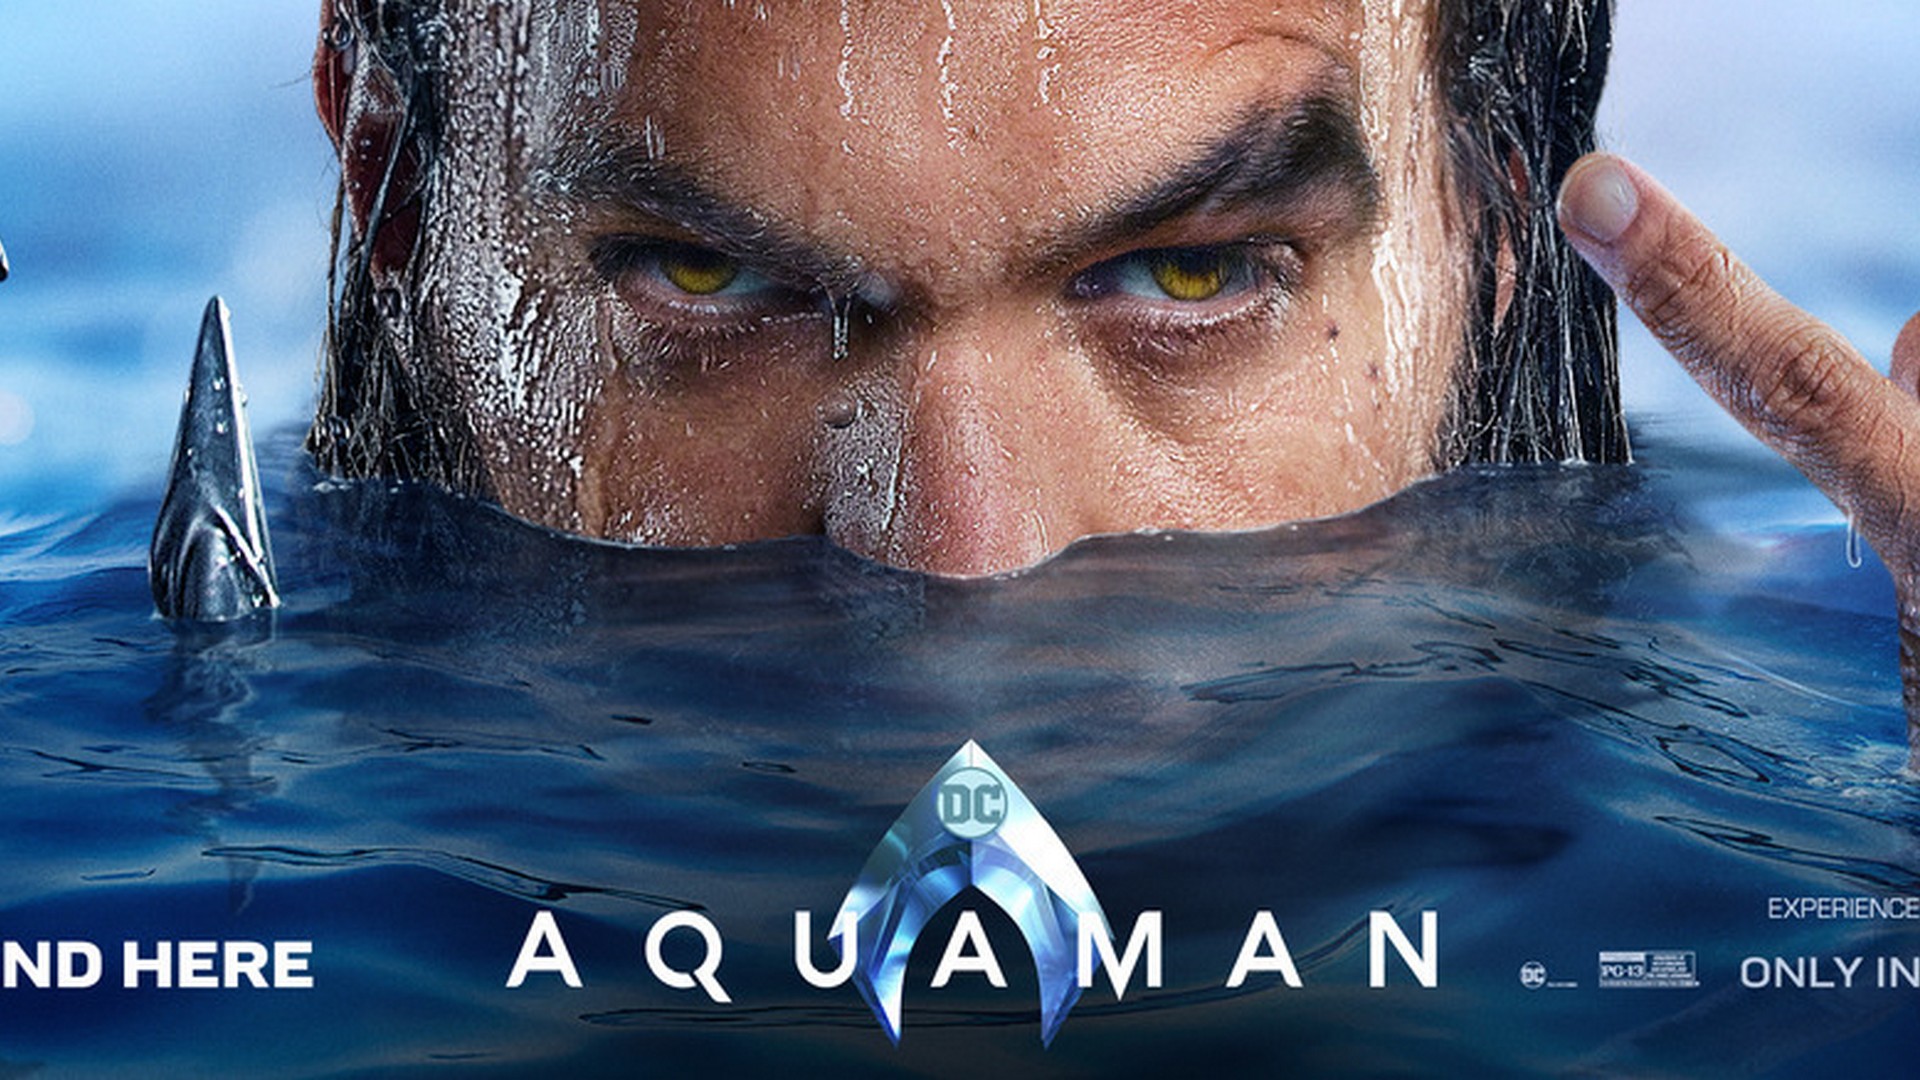 Aquaman 2018 Wallpaper with image resolution 1920x1080 pixel. You can use this wallpaper as background for your desktop Computer Screensavers, Android or iPhone smartphones